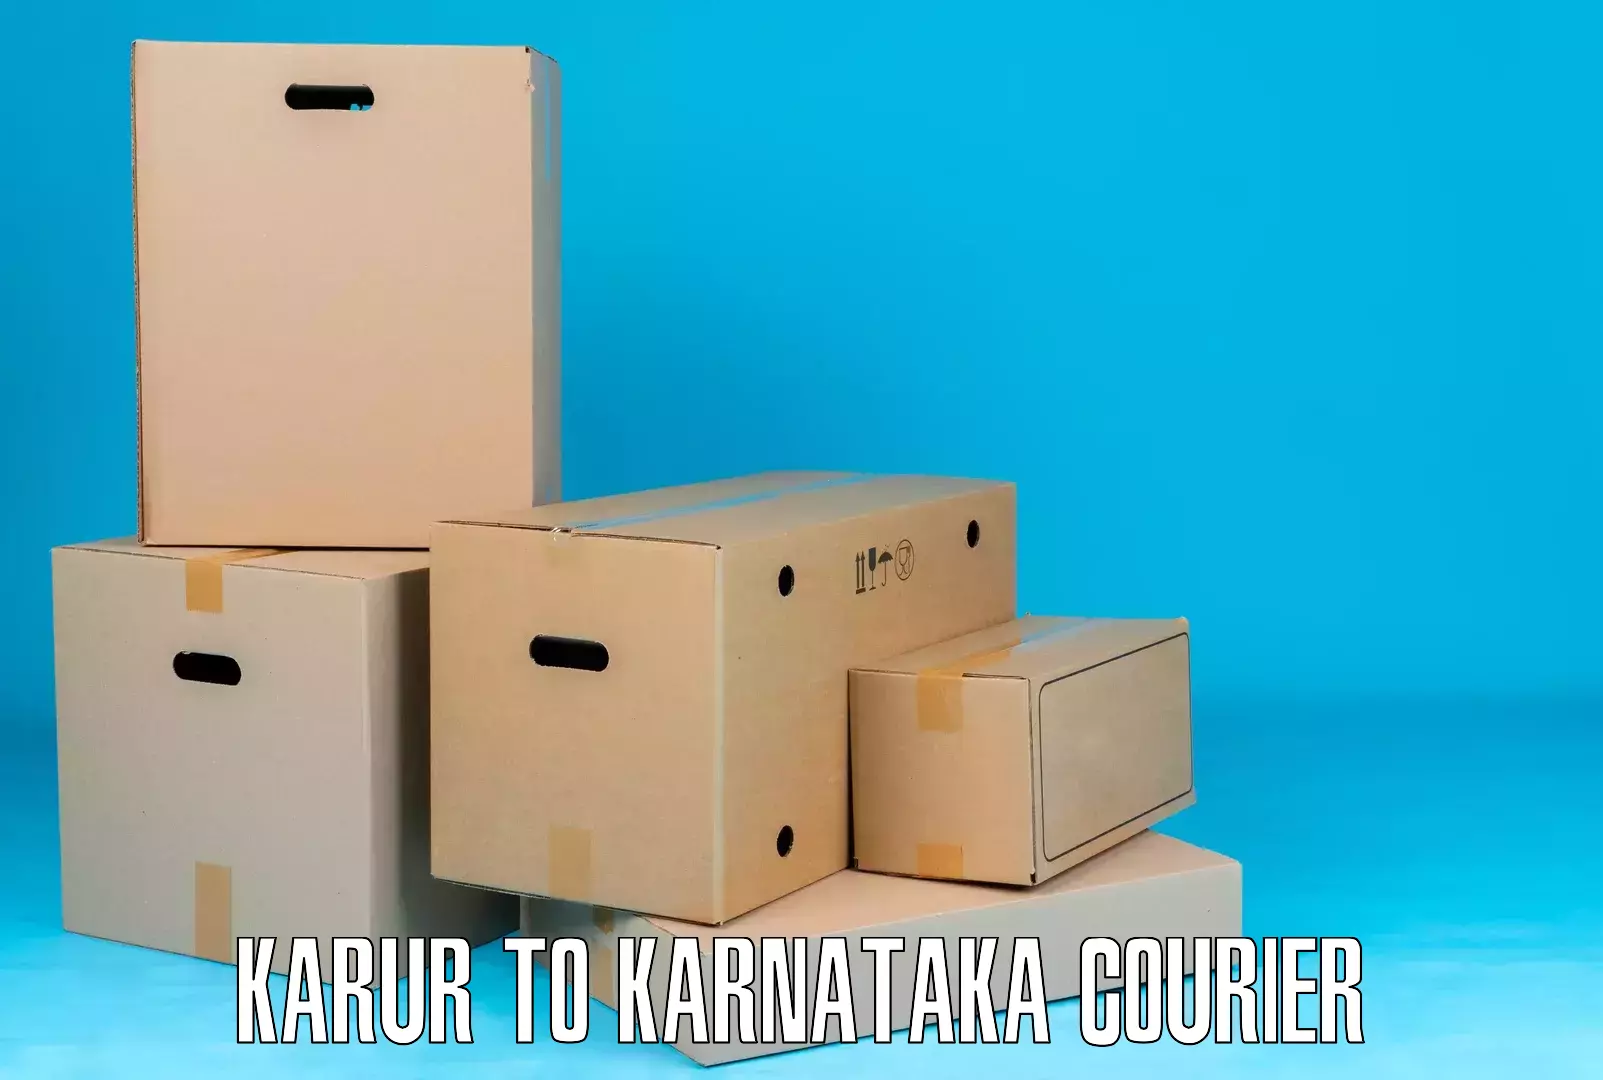 Full-service courier options in Karur to Thirthahalli